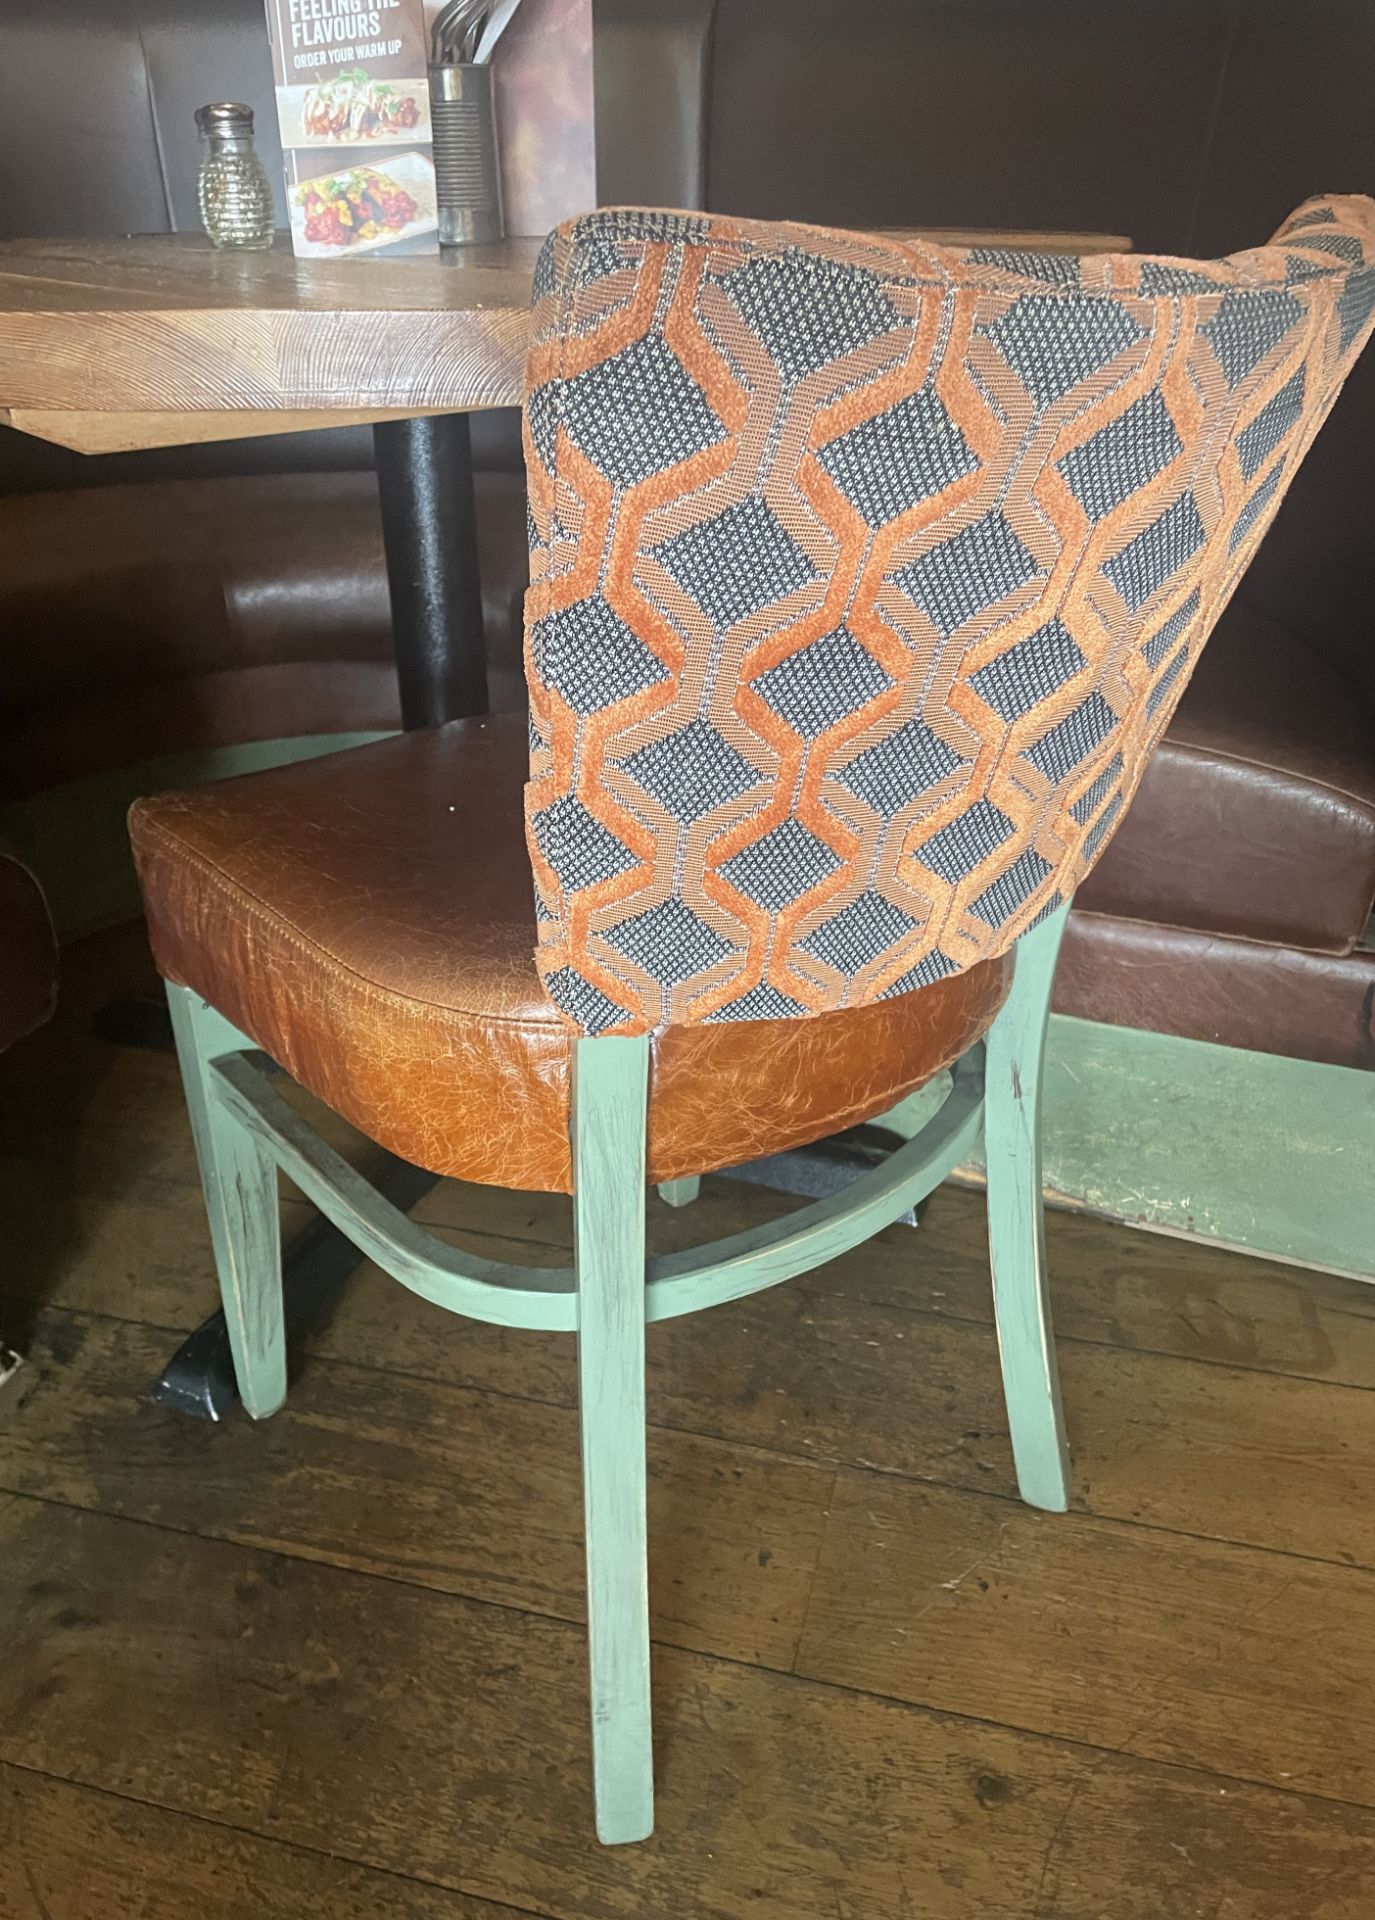 8 x Commercial Restaurant Dining Chairs Featuring Tan Leather Seats, Upholstered Back Rests and - Image 8 of 9